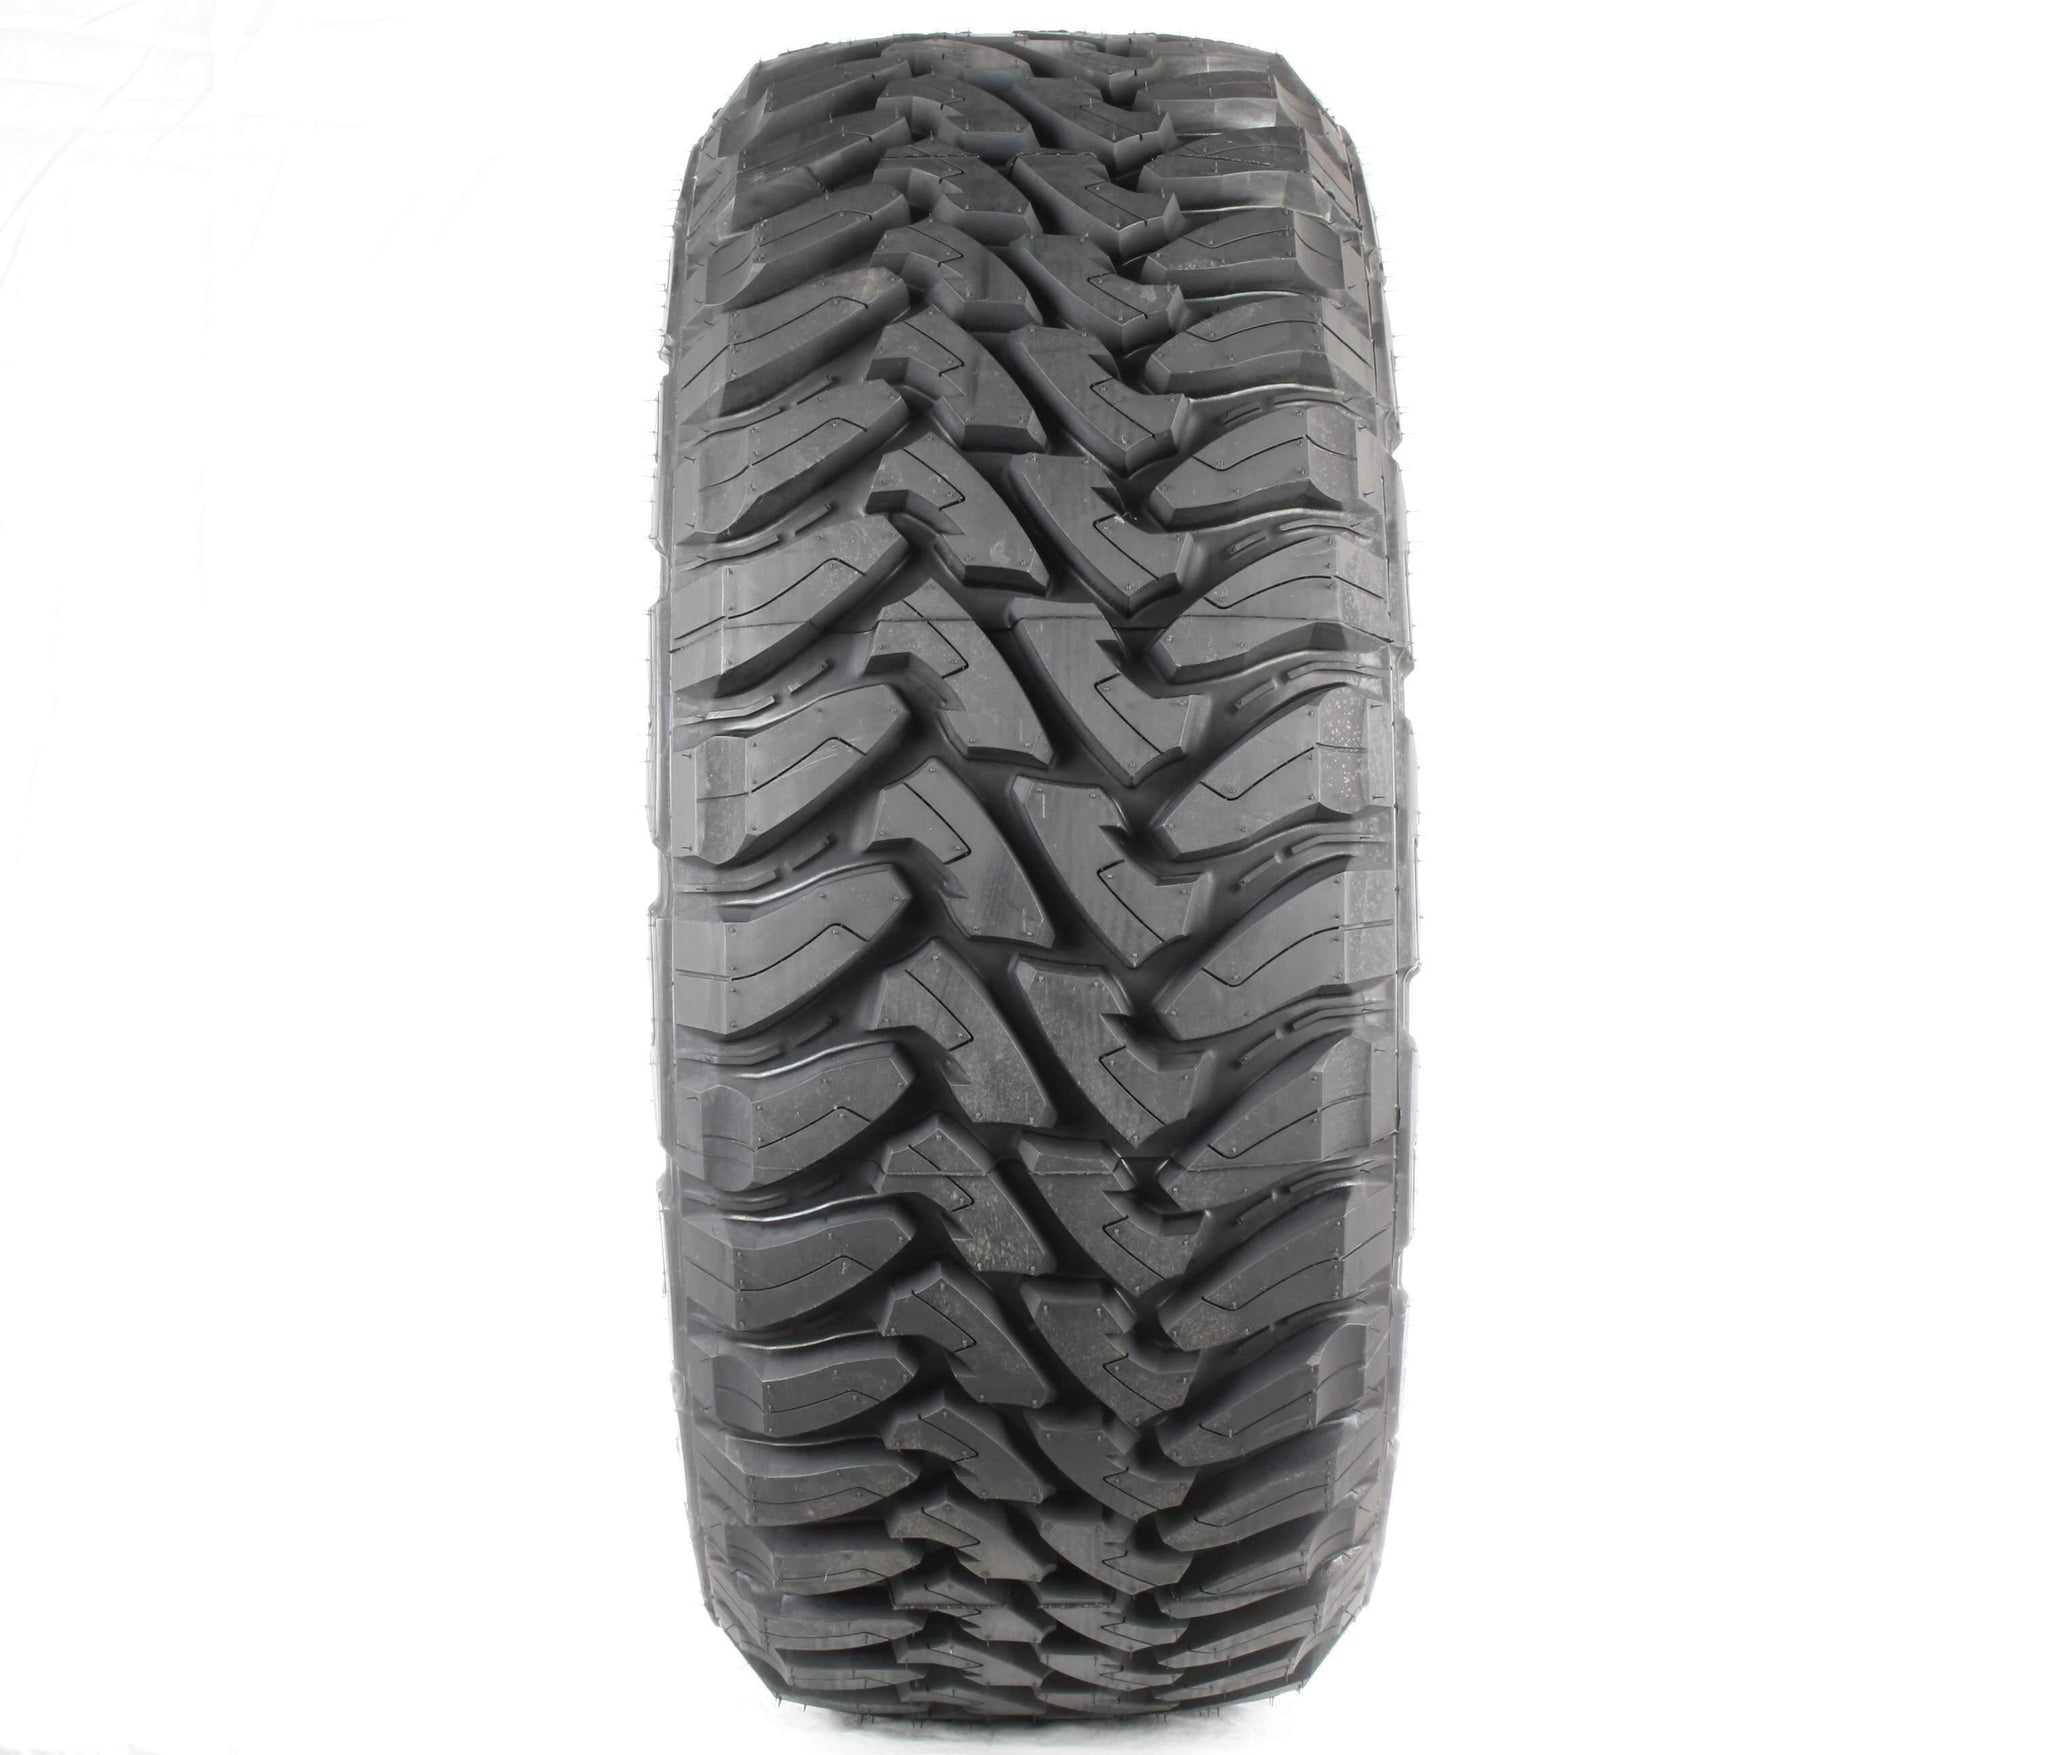 TOYO TIRES OPEN COUNTRY M/T 38X13.50R20LT Tires